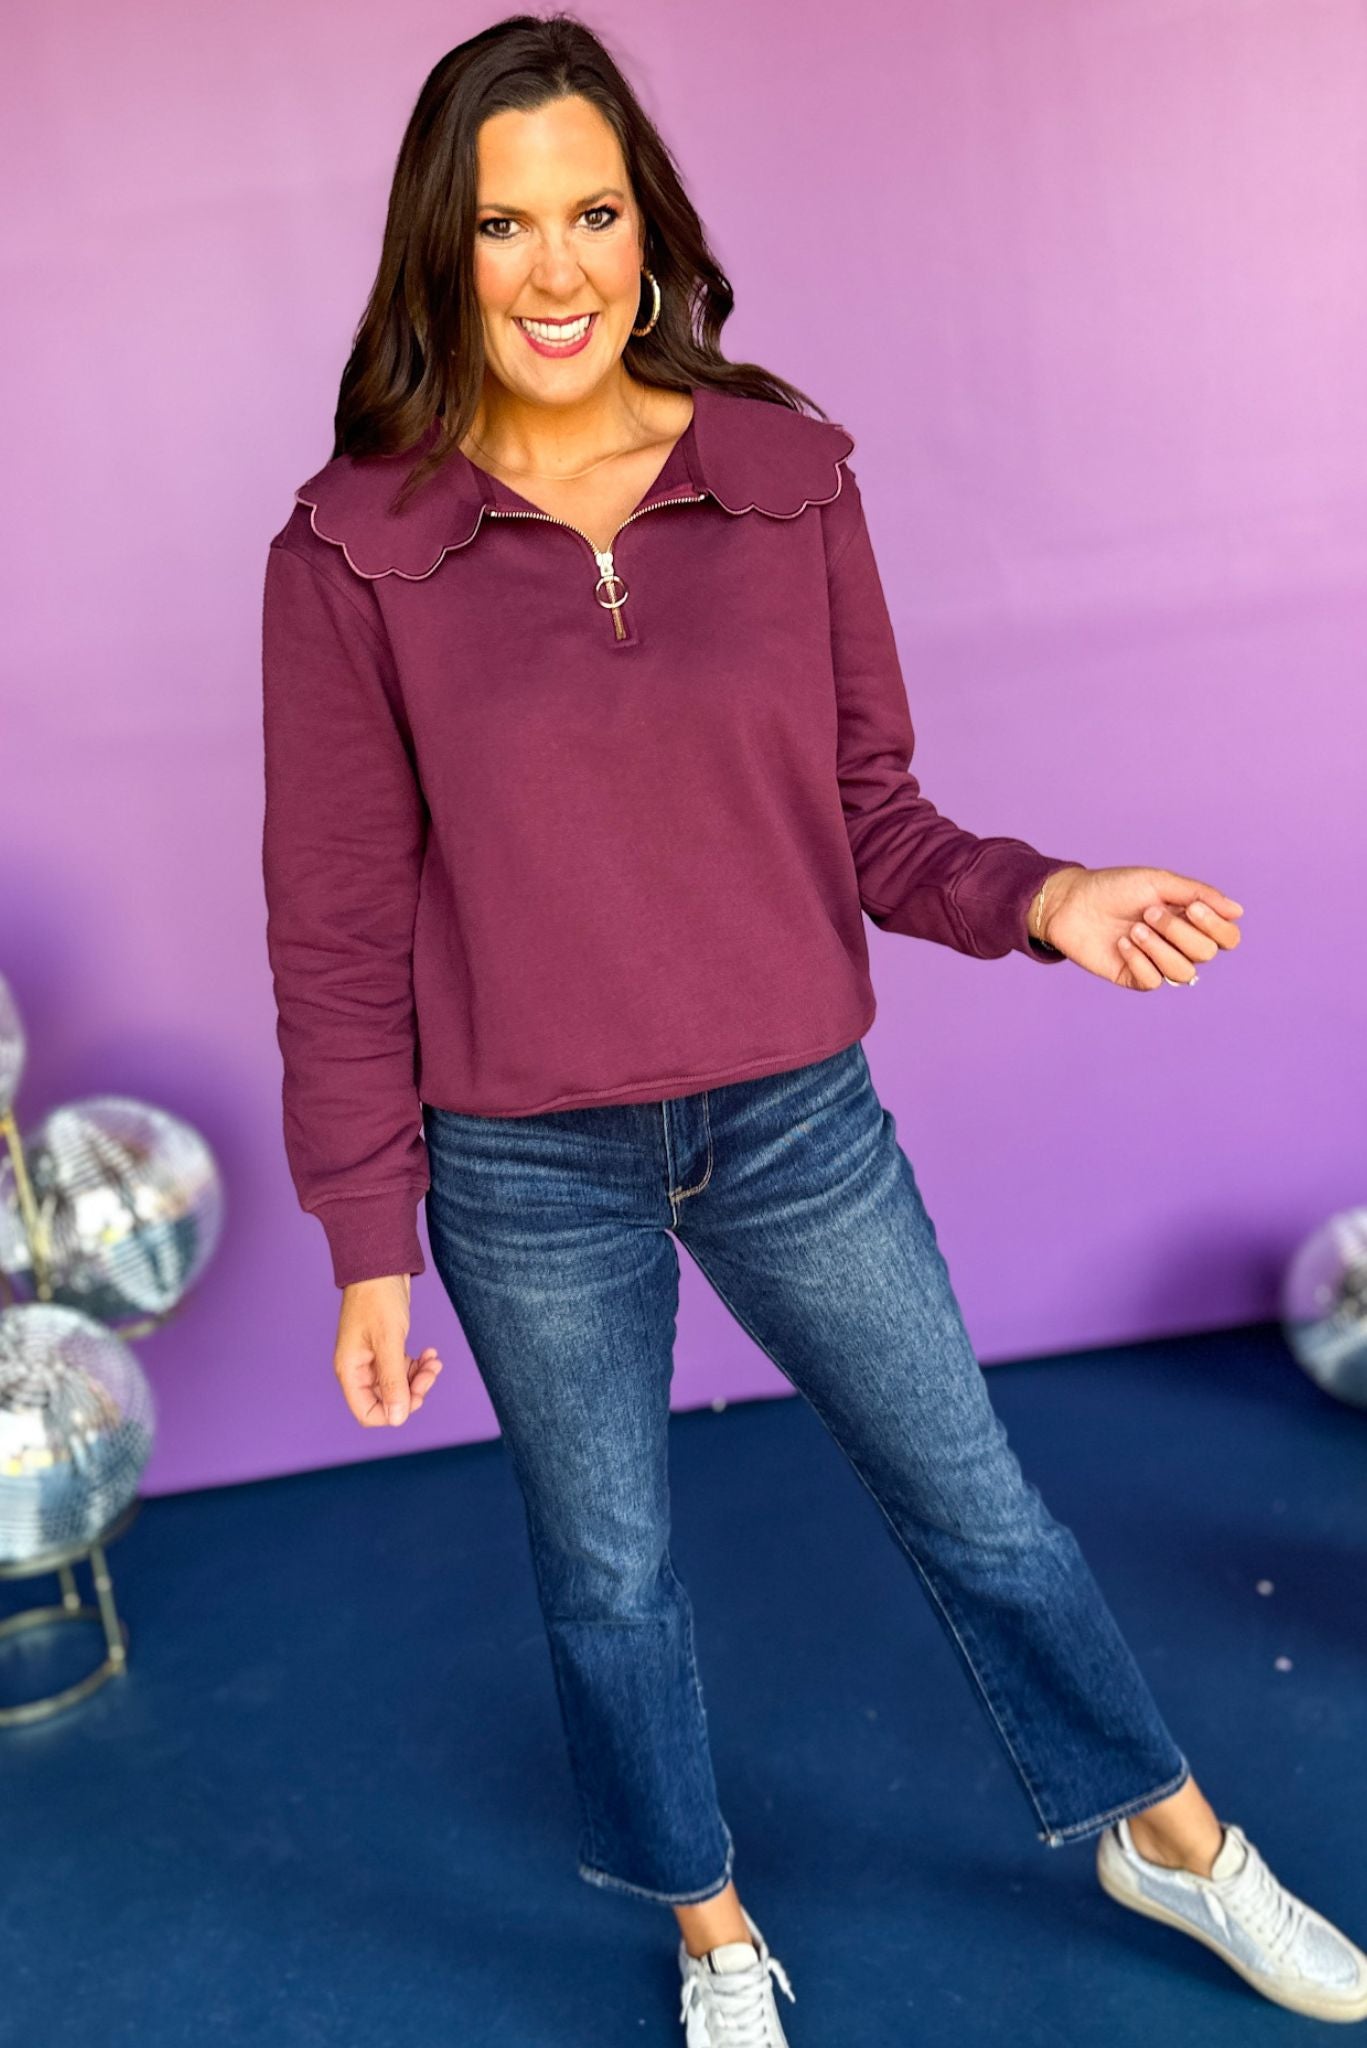 SSYS The Lucy Pullover In Eggplant, elevated top, elevated style, fall top, fall style, must ahve top, must have style, must have fall, scallop detail, mom style, ssys the label, shop style your senses by mallory fitzsimmons